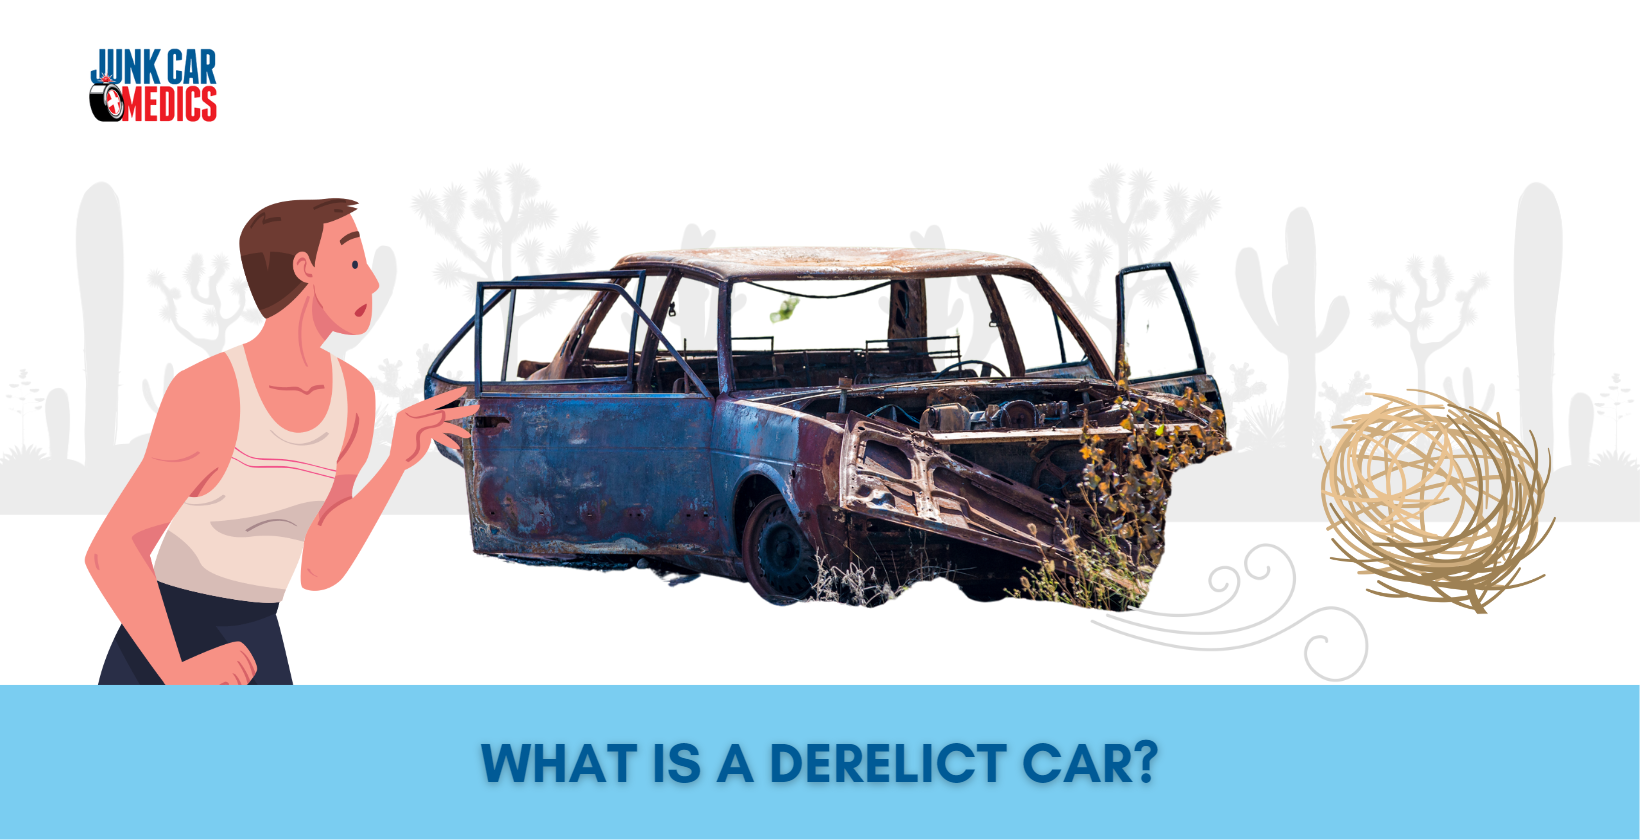 What is a Derelict Car?